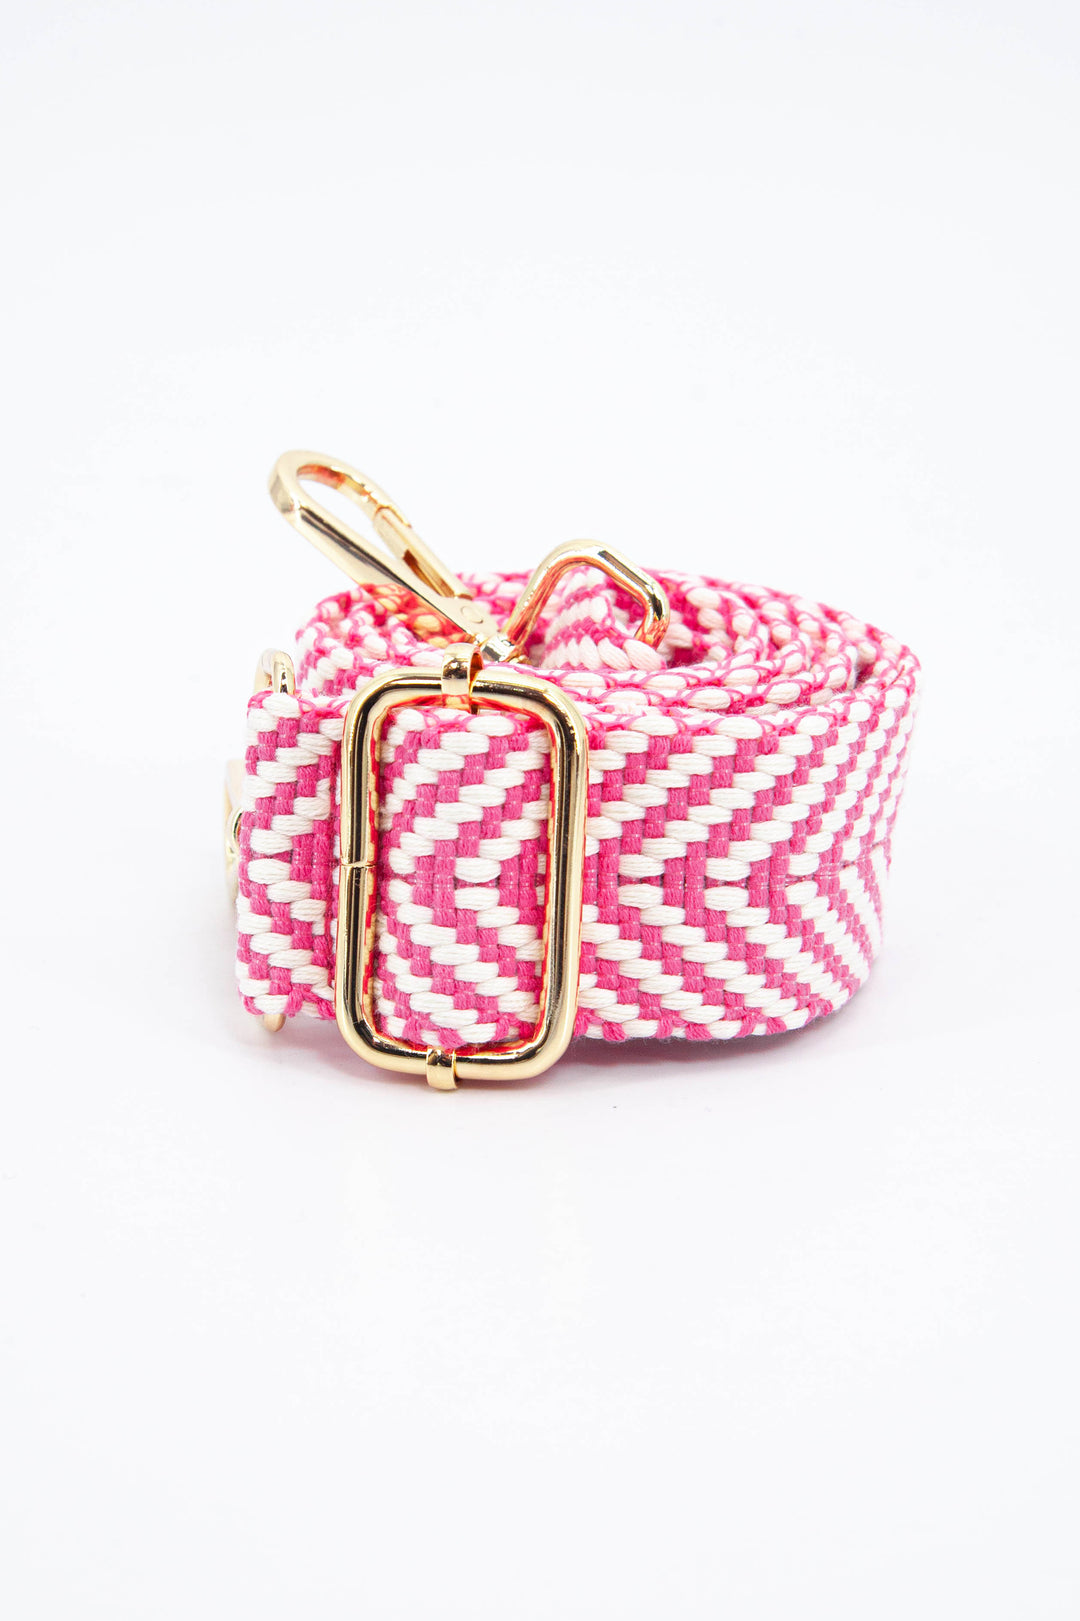 close up of the woven fabric and gold adjustable buckle